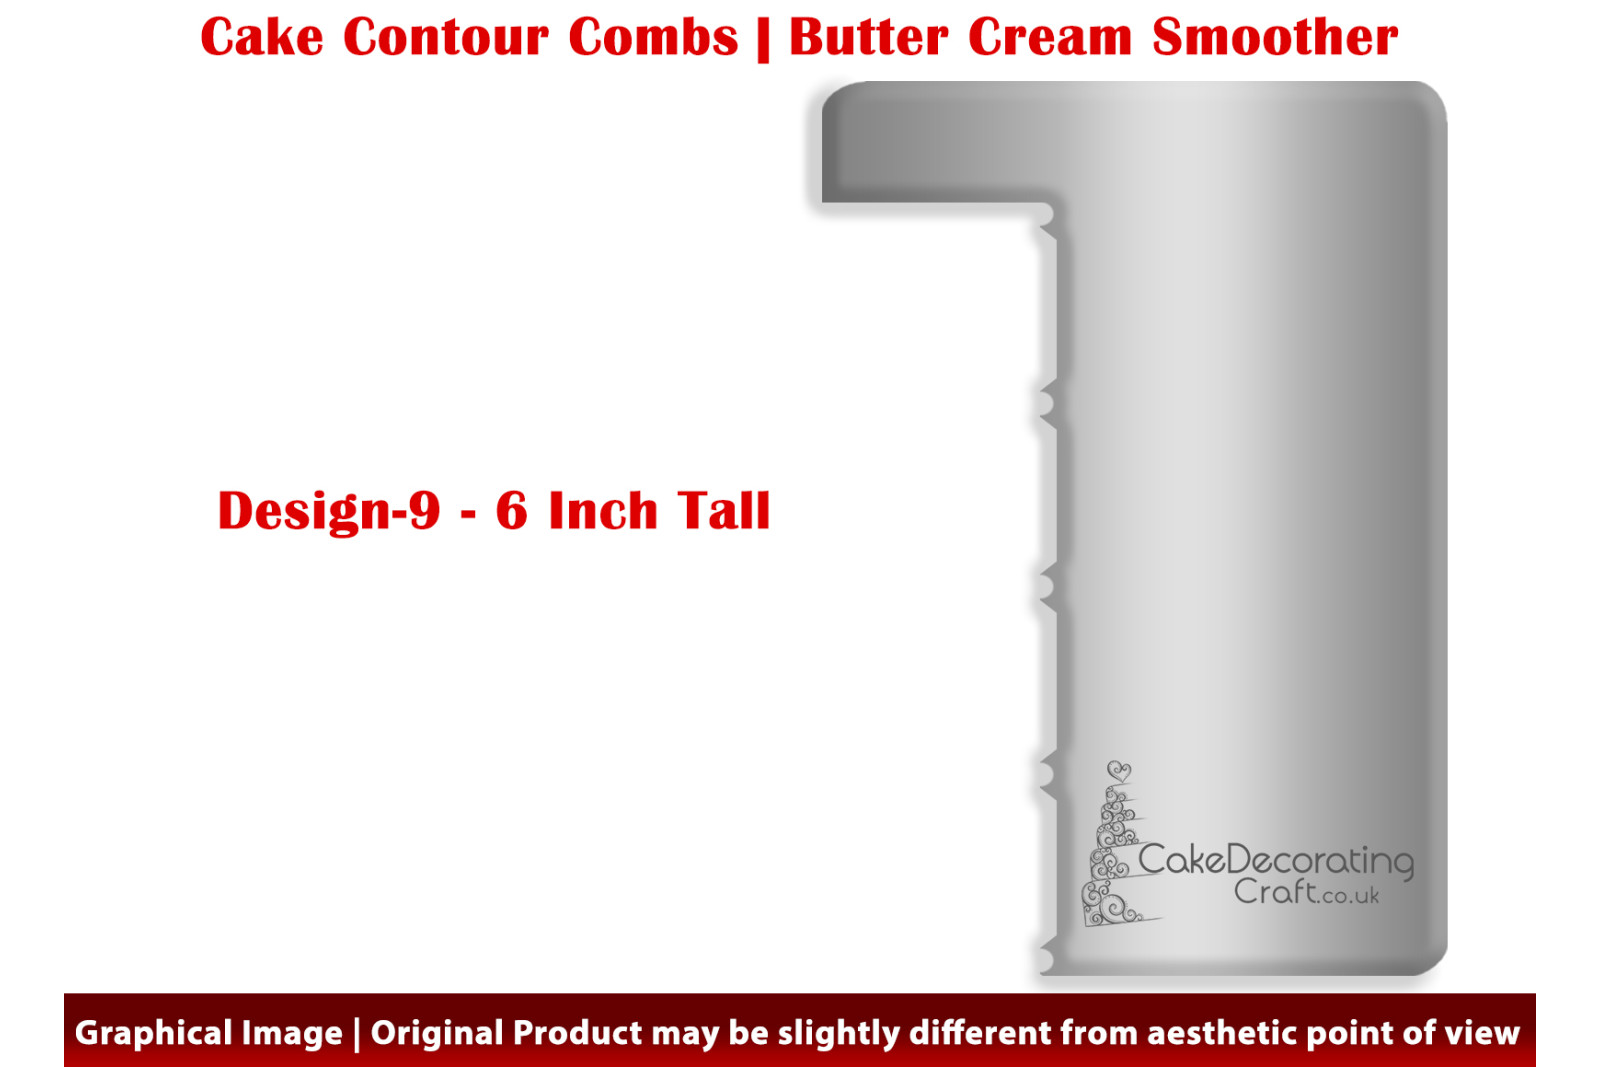 Fabulous Facets | Design 9 | 6 Inch | Cake Decorating Craft | Cake Contour Combs | Smoothing | Metal Spreader | Butter Cream Smoothing | Genius Tool